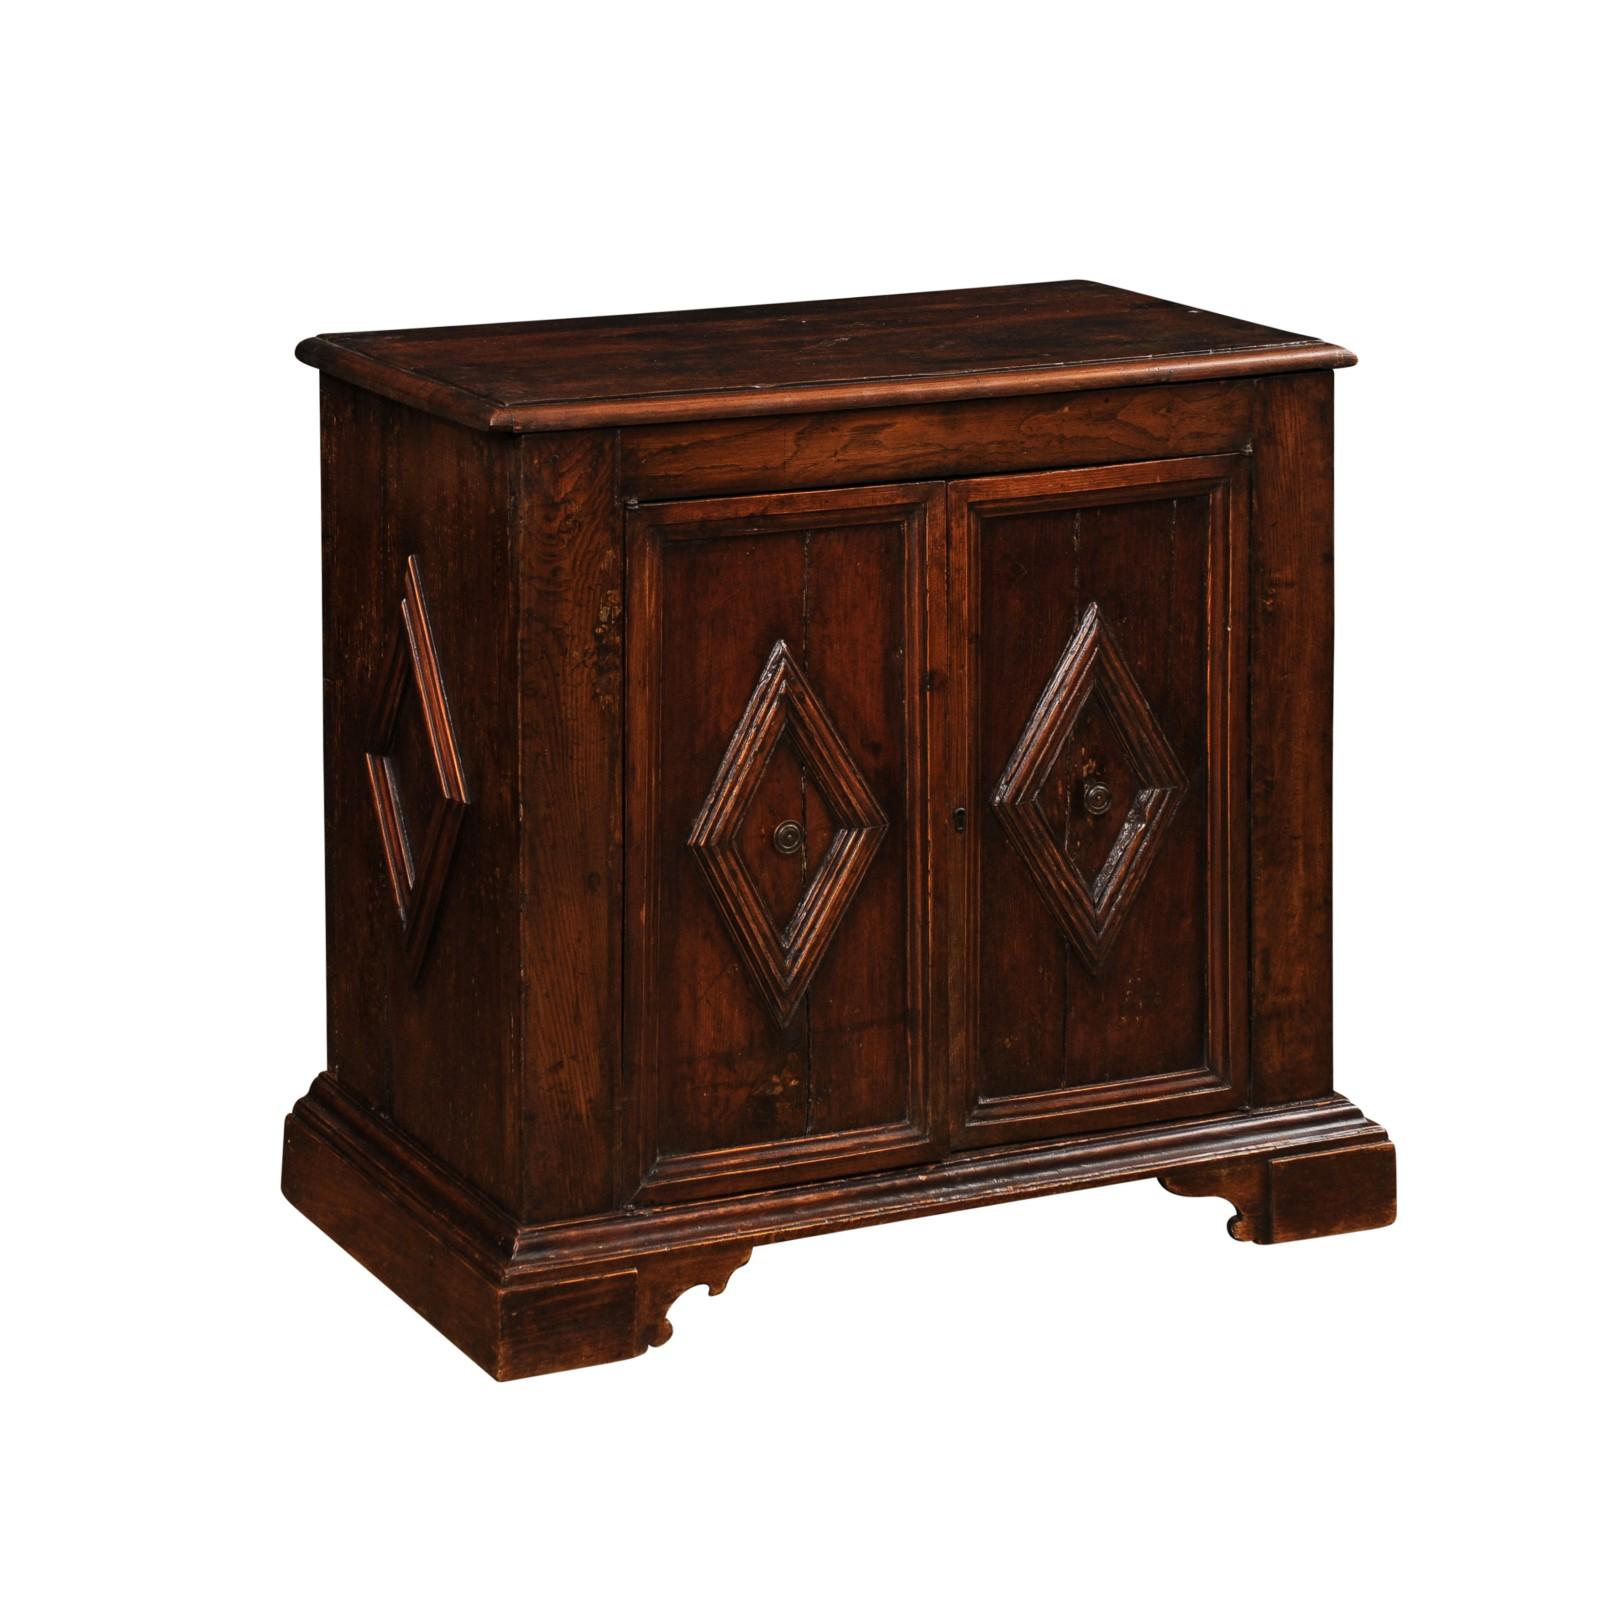 An Italian walnut buffet from circa 1790 with two doors and carved diamond motifs. Embrace the timeless beauty and rich heritage of this Italian walnut buffet from circa 1790, a masterpiece of craftsmanship and design from the late 18th century.